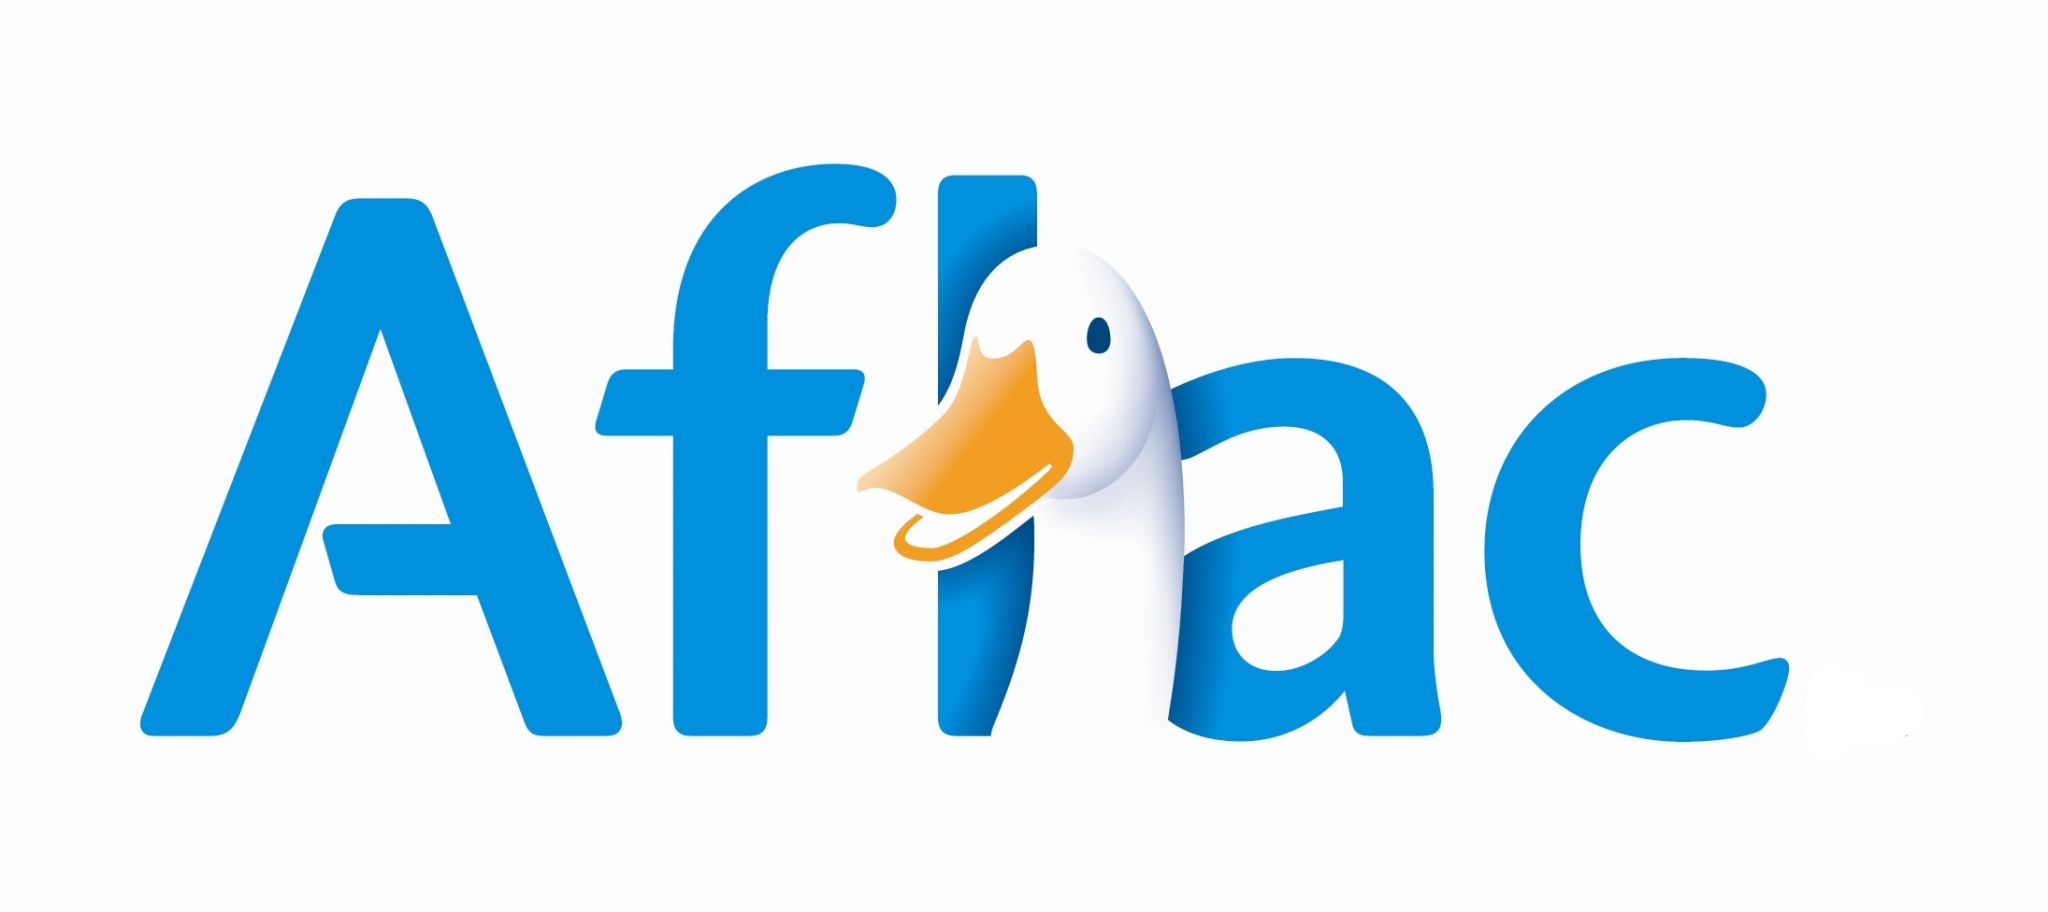 /assets/contentimages/aflac.jpg